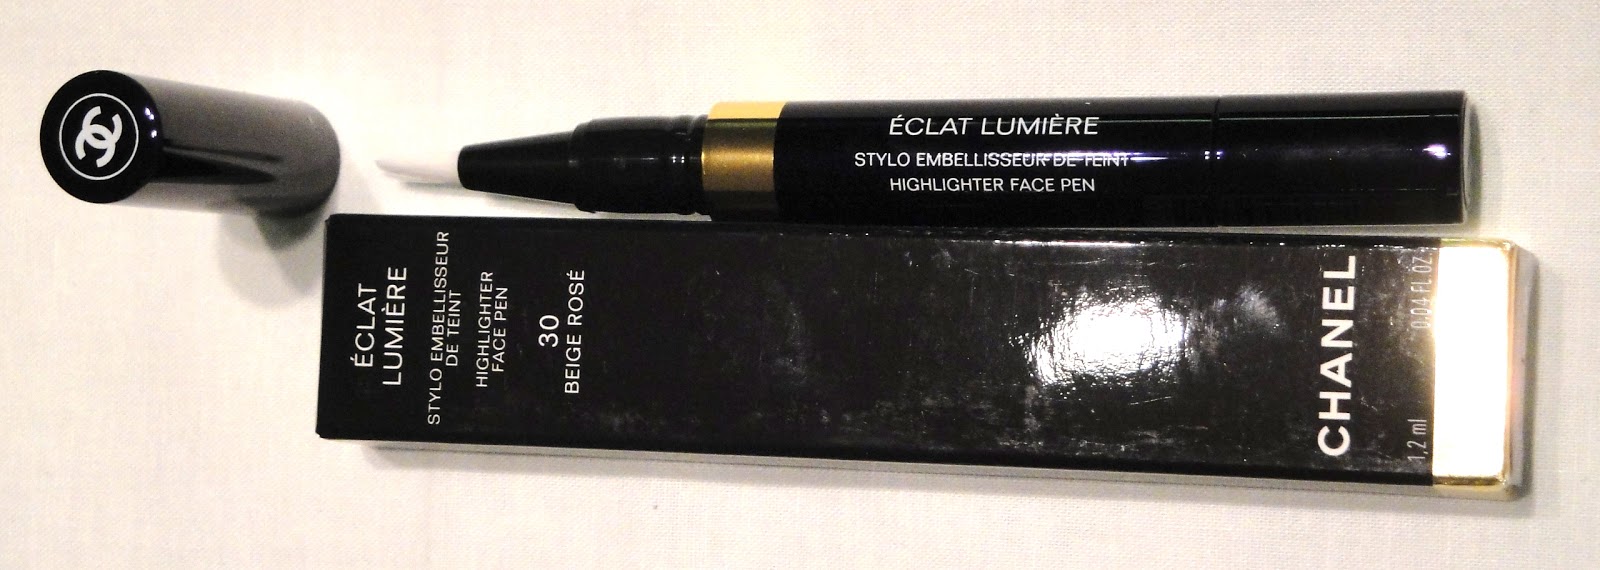 Beauty and the Chanel Eclat Lumiere Review